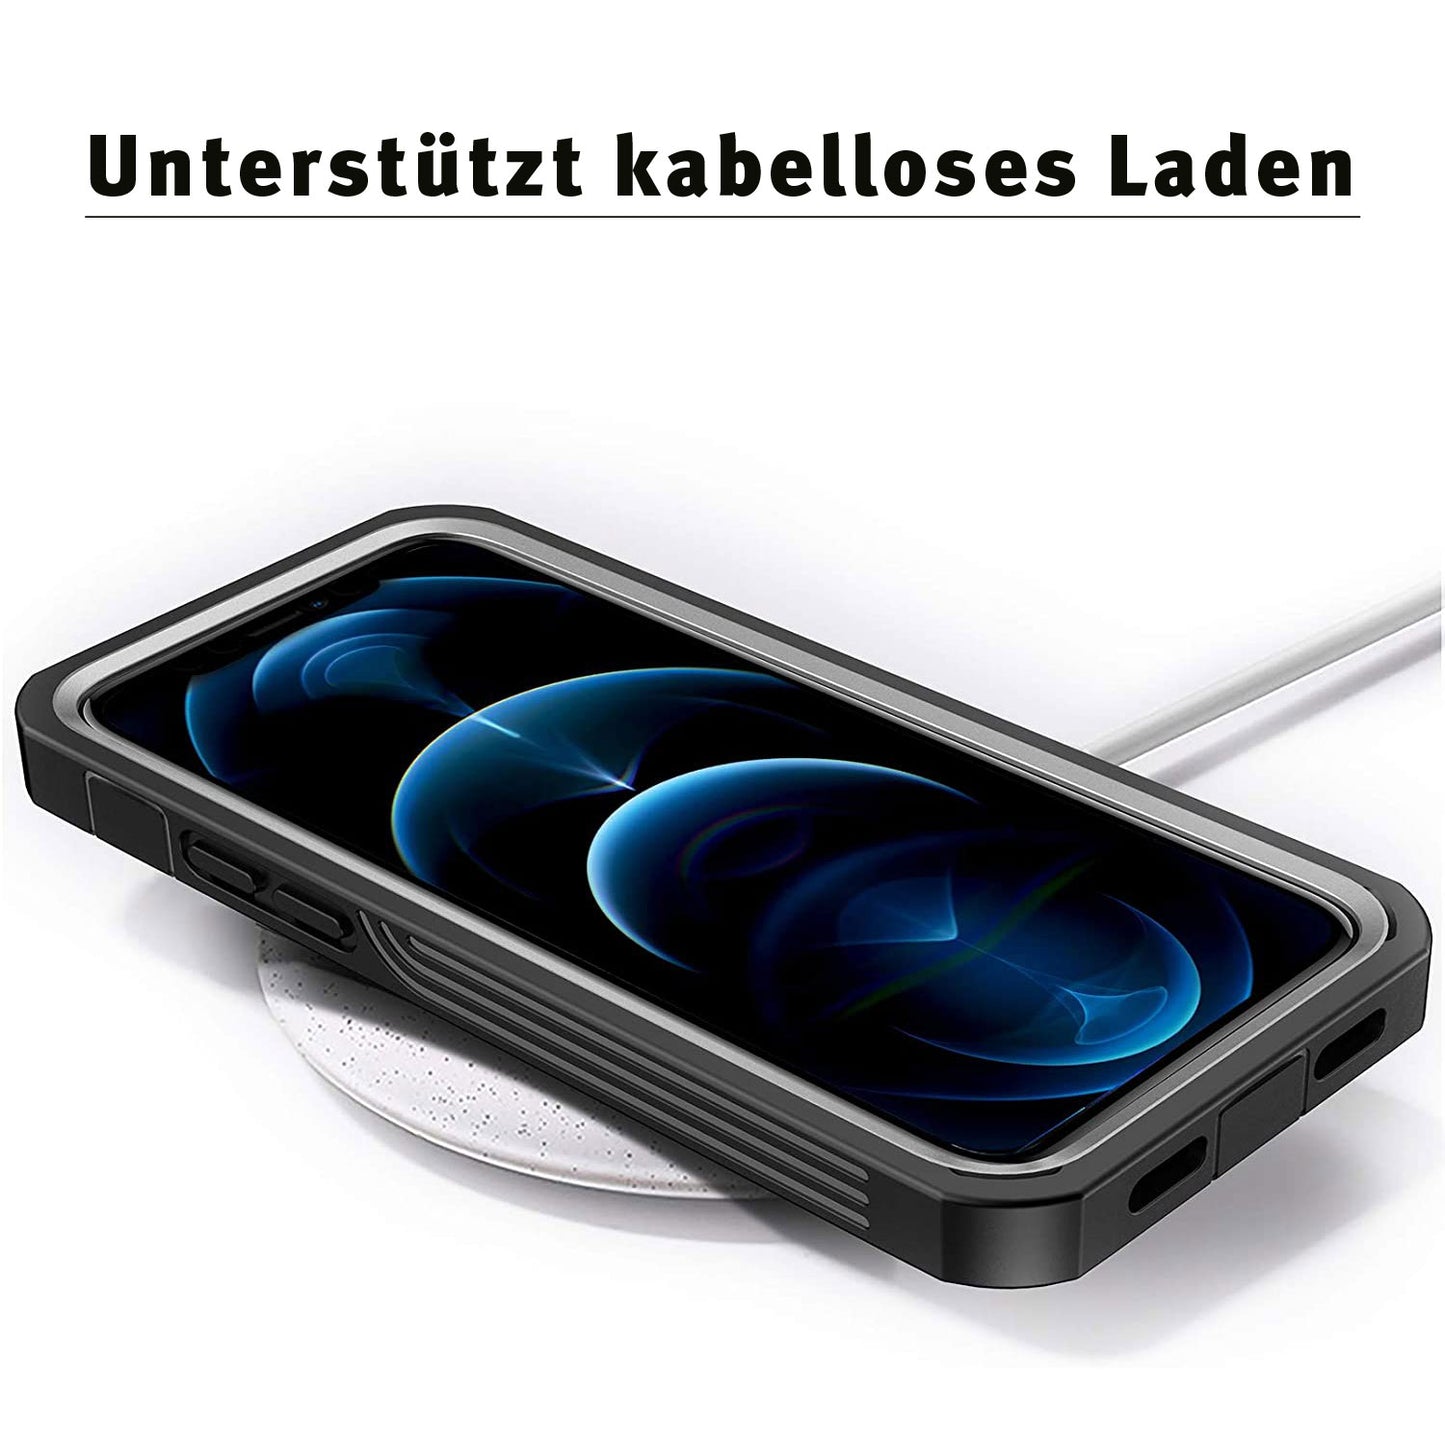 iphone-12-pro-outdoor-caseOi9fC85V6H9F7